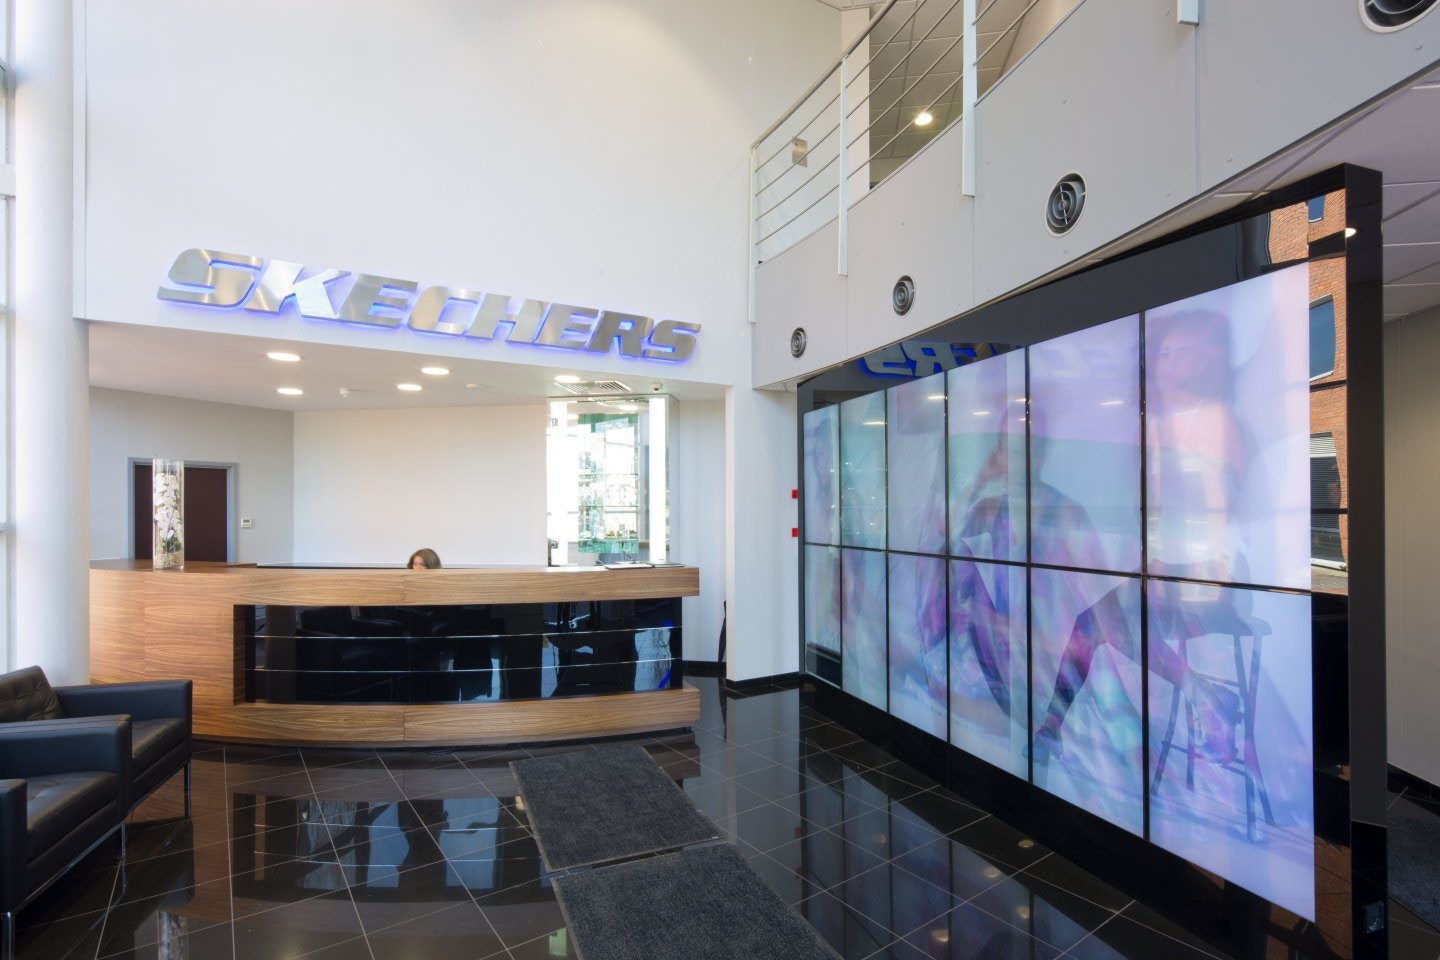 Sketchers reception area with LED wall